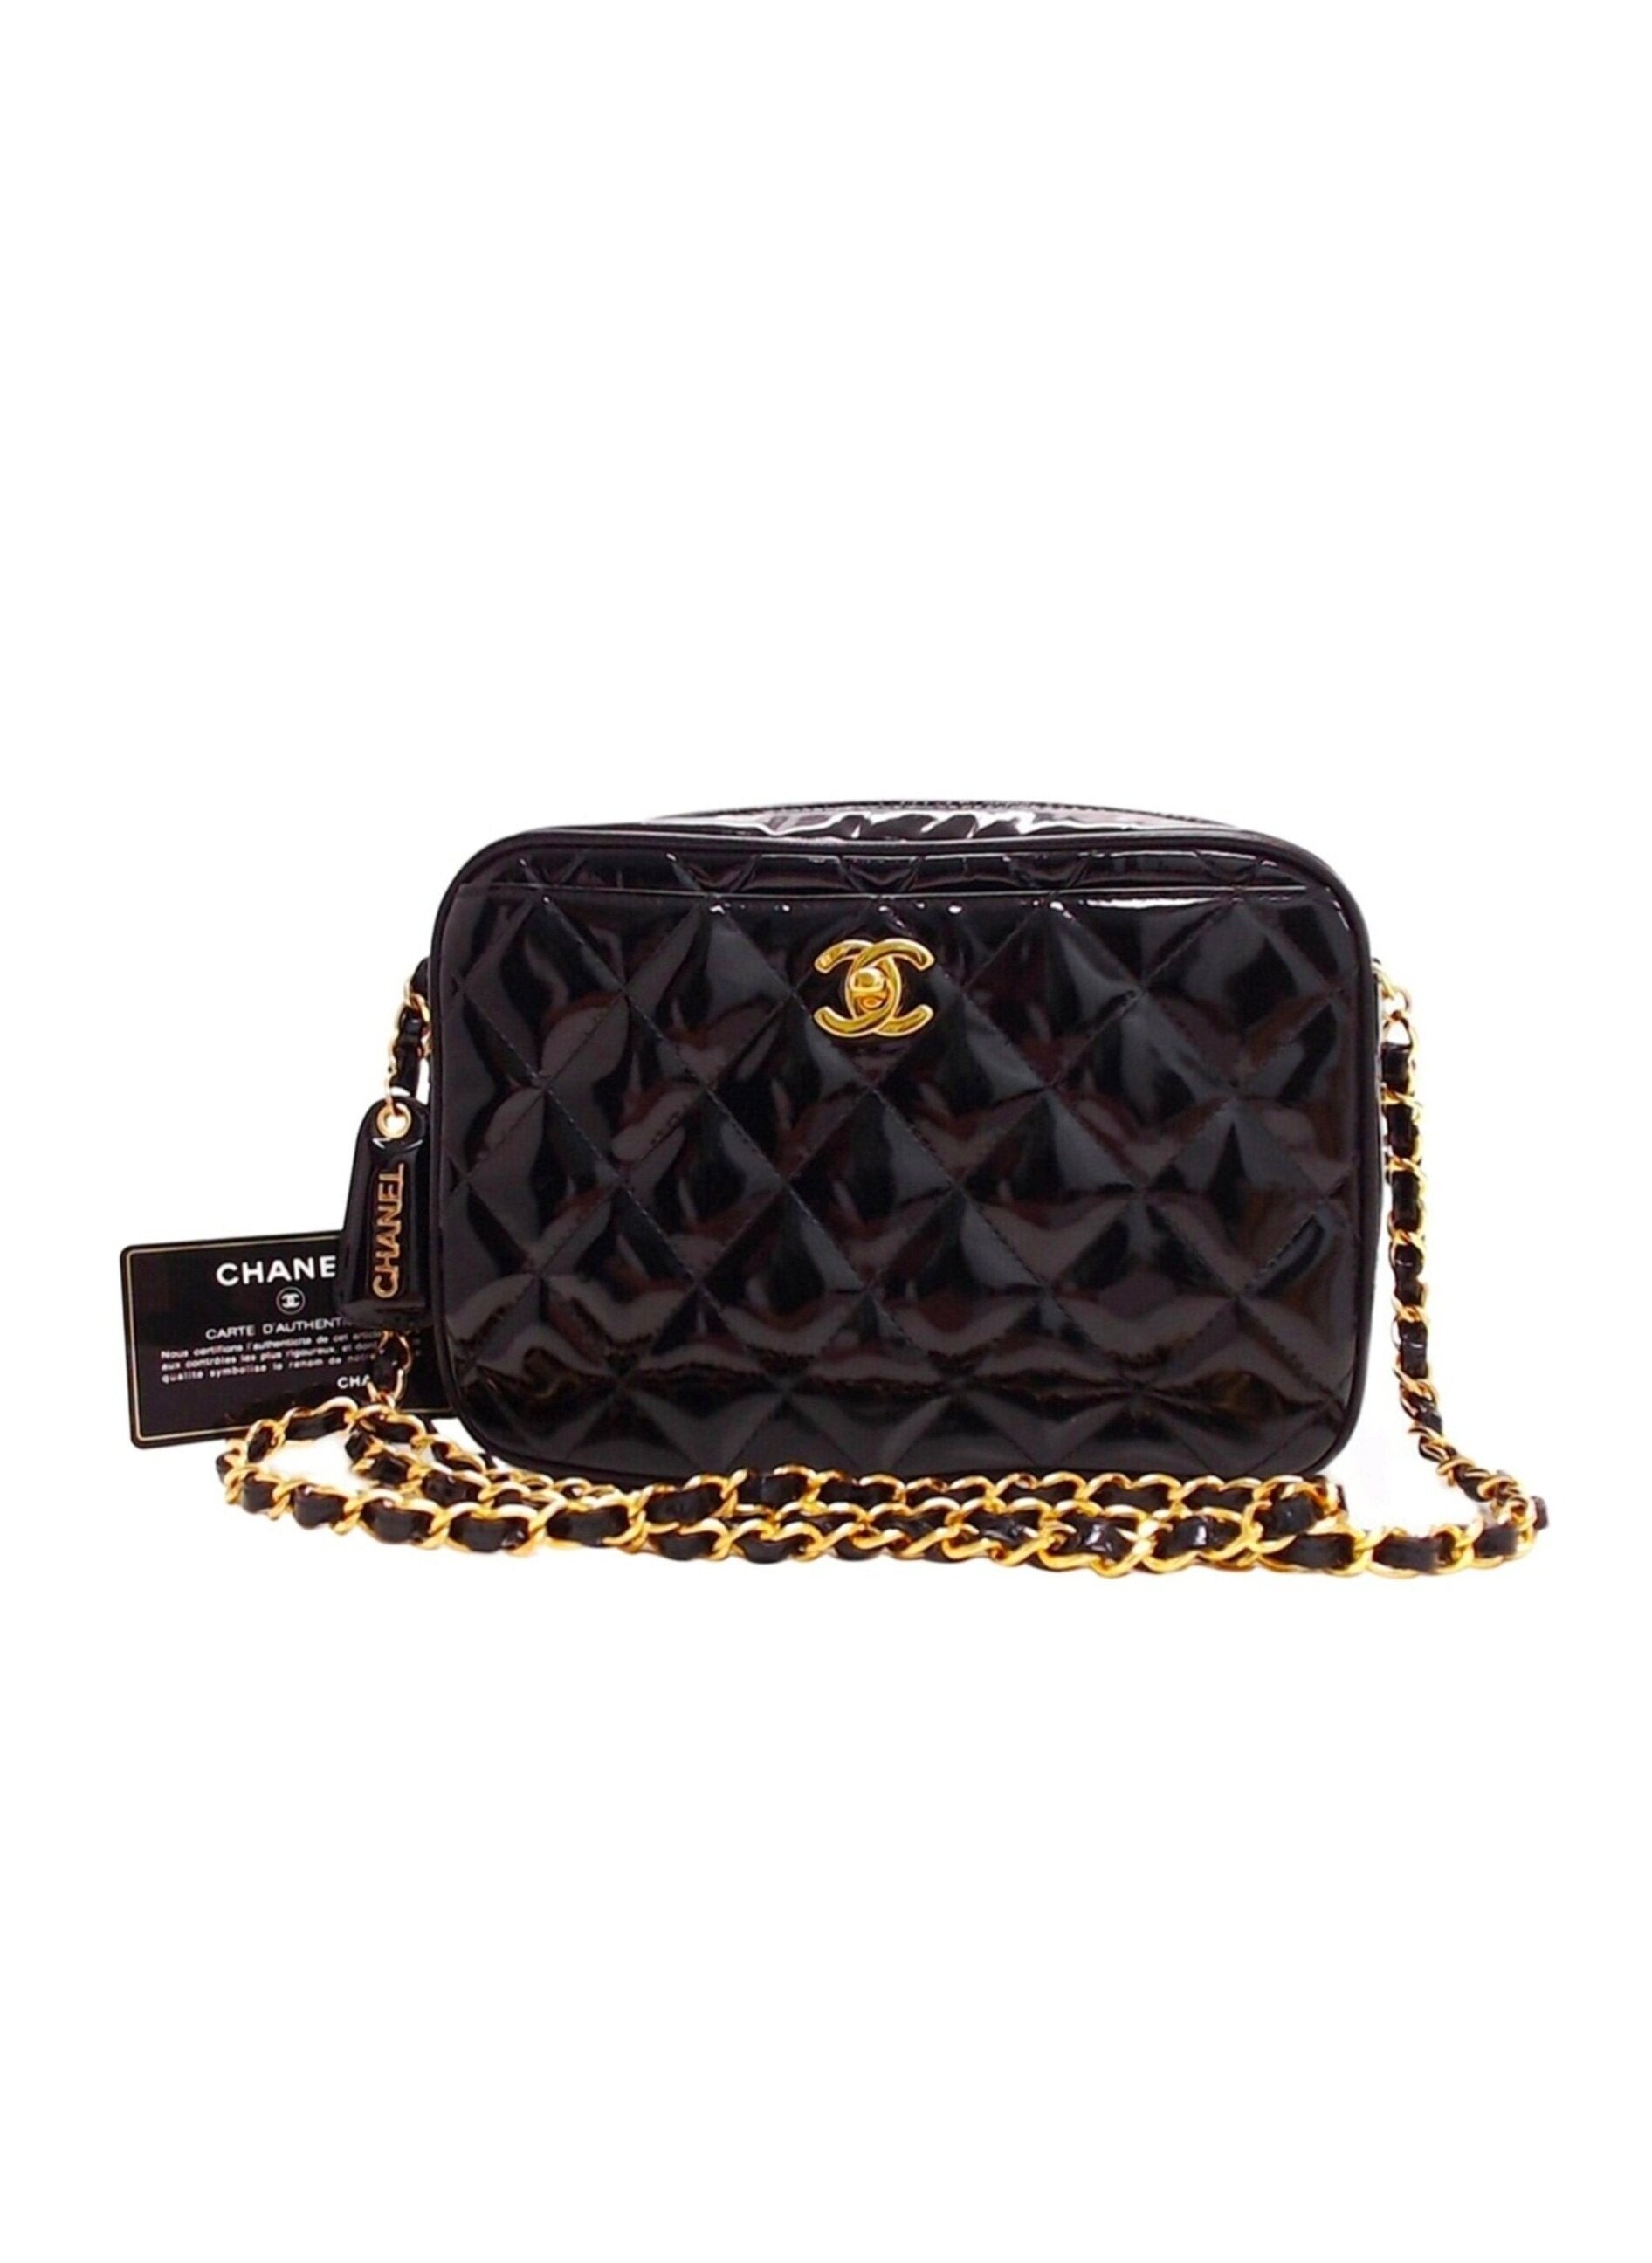 Chanel 2000s Rare Quilted Patent Camera Black Bag